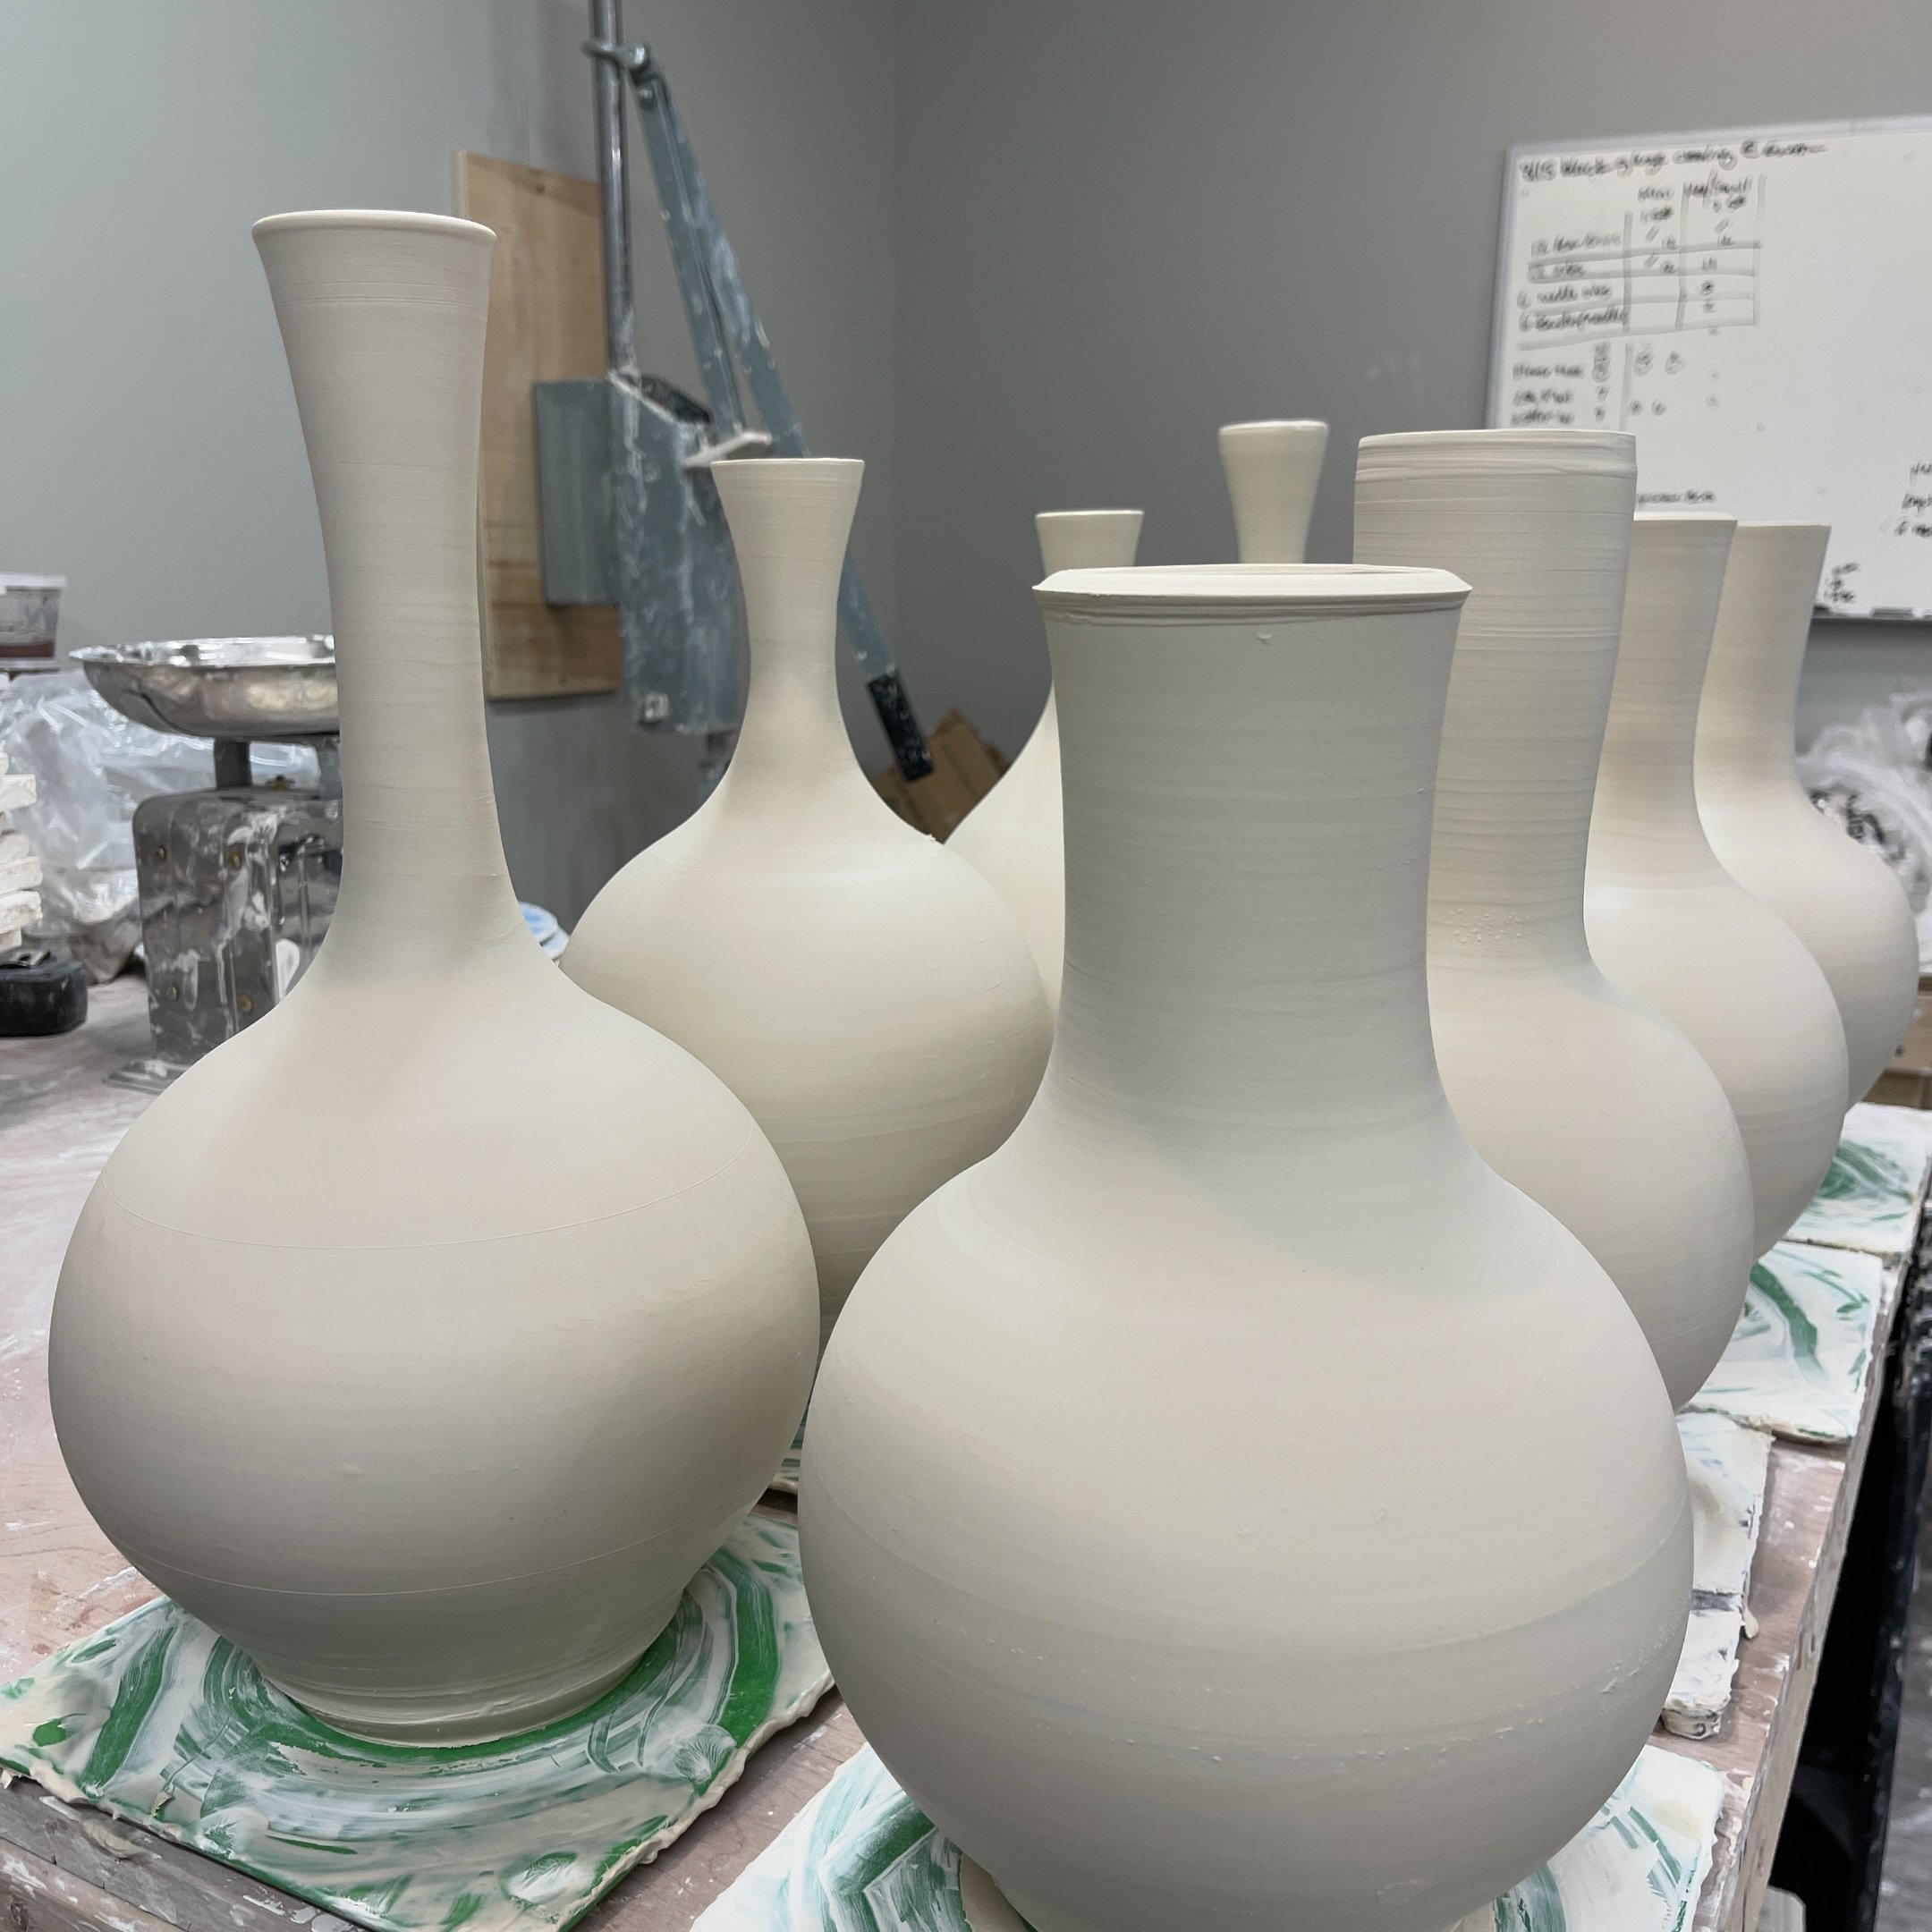 Tallish pots today. Good thing they&rsquo;ll shrink a bit! Once I include a glaze catcher, I&rsquo;ll be getting close to the for max my 18&rdquo; tall kilns. Typing that out, all of a sudden my kilns seem comically small.  Small kilns are great for 